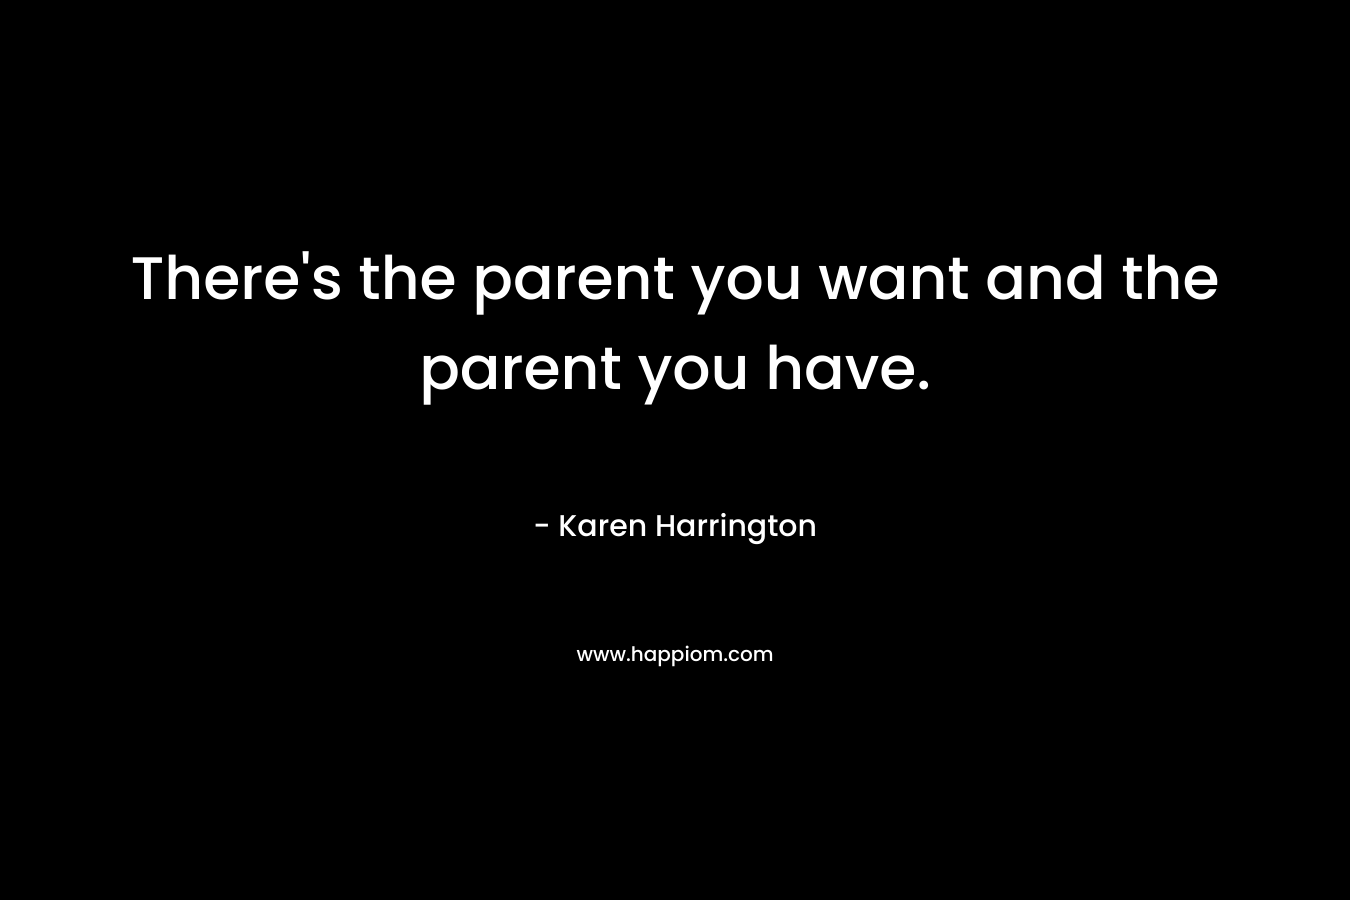 There's the parent you want and the parent you have.